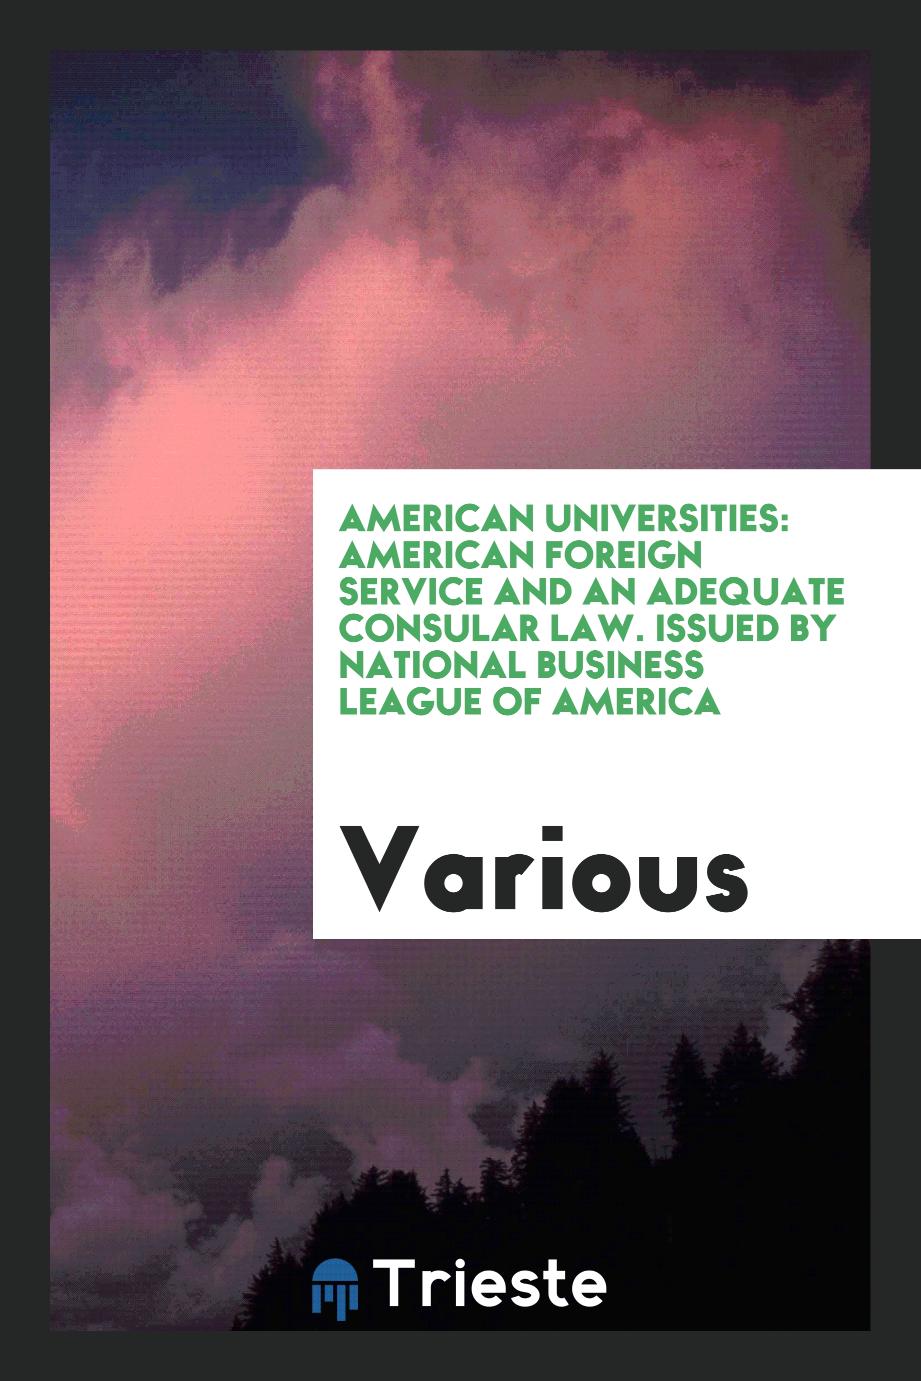 American Universities: American Foreign Service and an Adequate Consular Law. Issued by National Business League of America